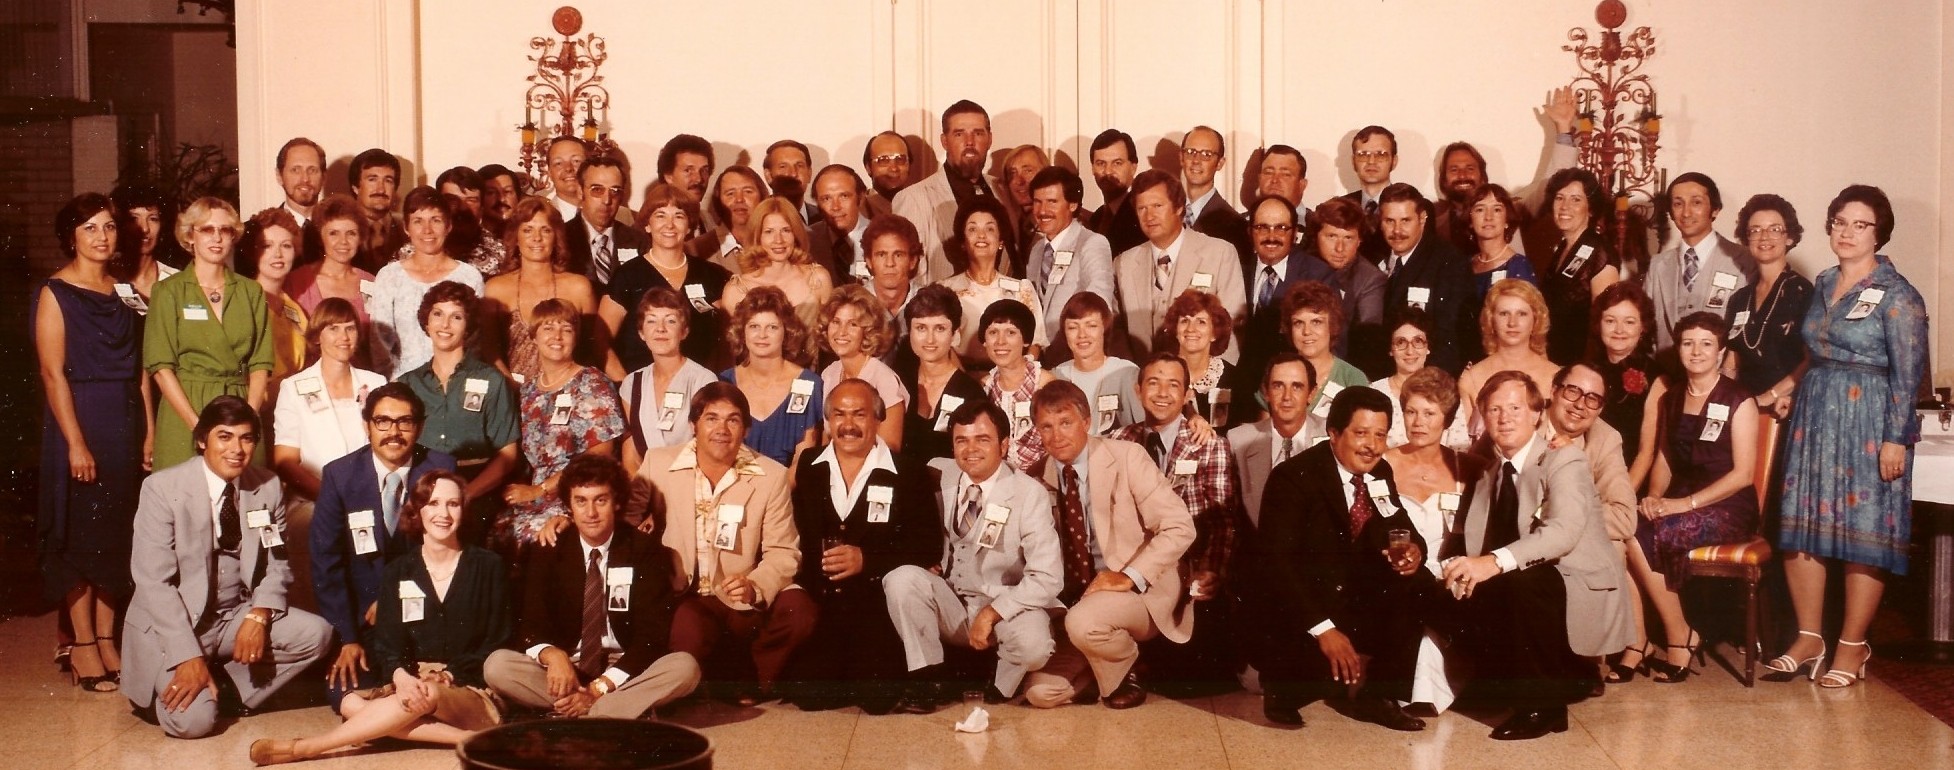 Class Reunion Photo from 1980 ...... DOUBLE CLICK ON IMAGE TO ENLARGE